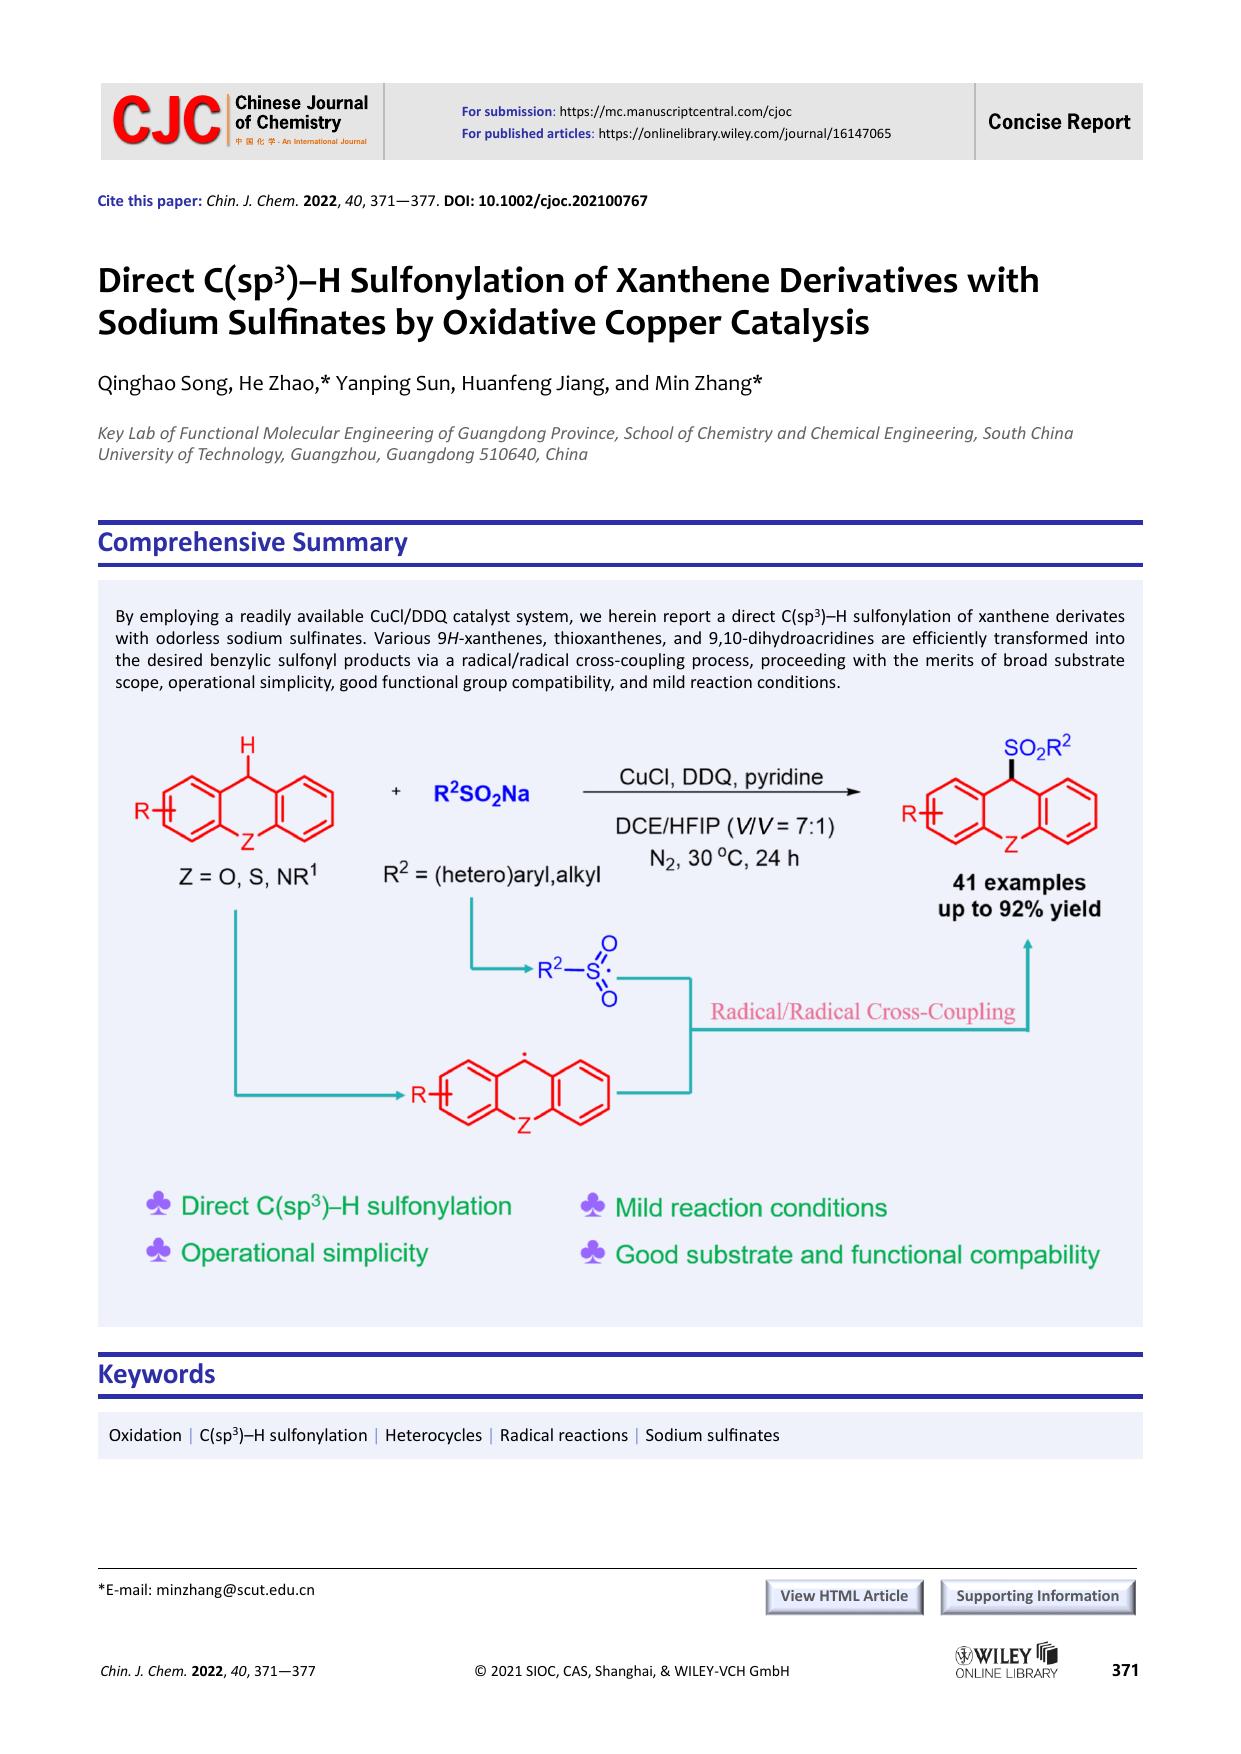 Direct C(sp3)-H Sulfonylation of Xanthene Derivatives with So-dium Sulï¬nates by Oxidative Copper Catalysis by 宋庆豪